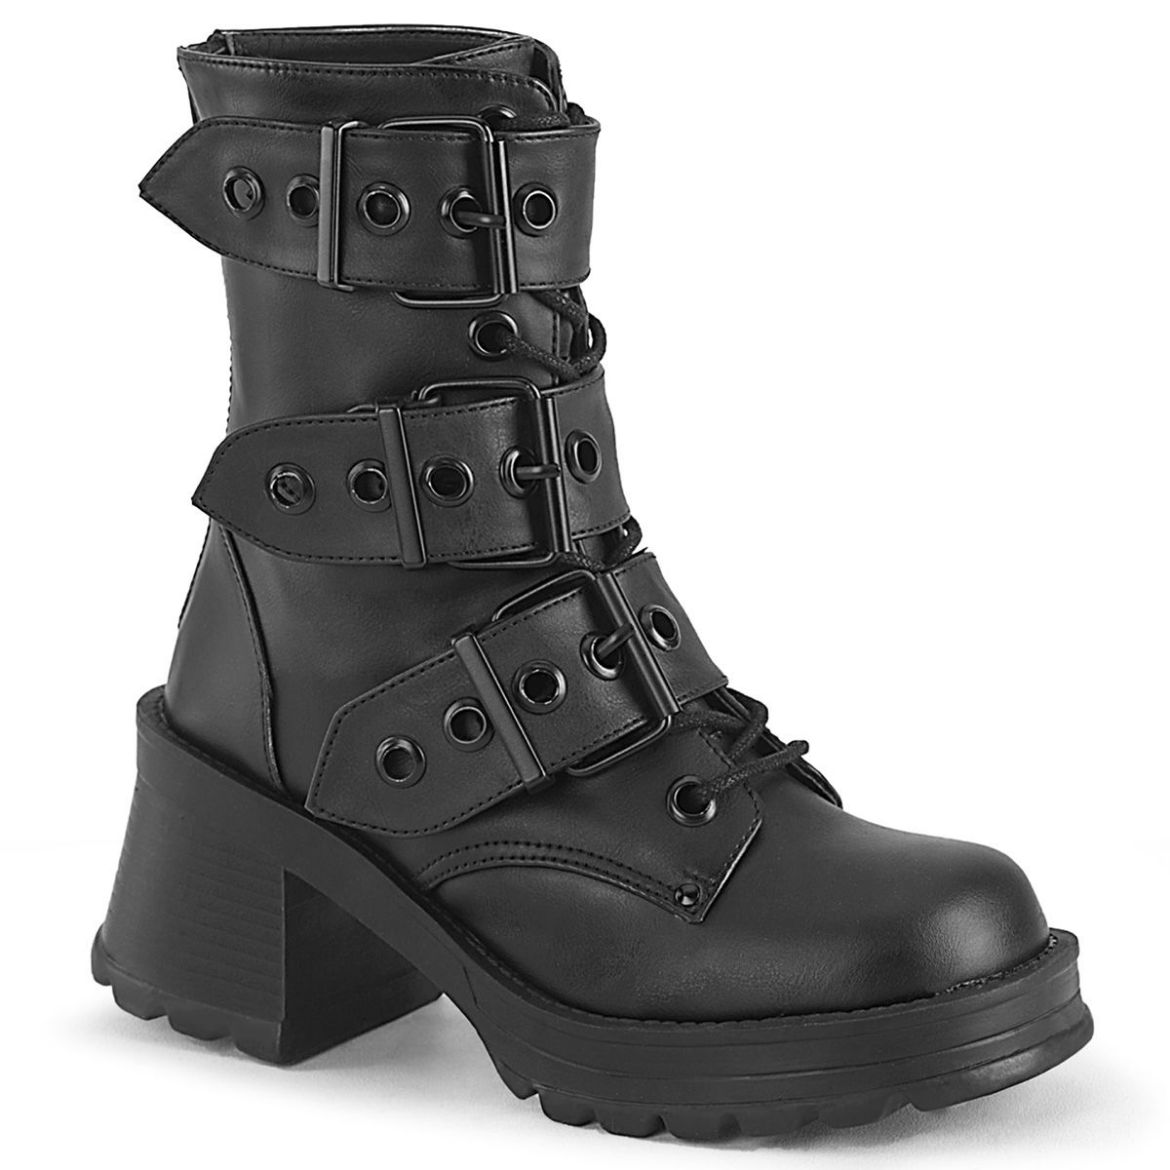 Image of Demonia BRATTY-118 Blk Vegan Leather 2 3/4 Inch Heel 1 Inch Platform Lace-Up Ankle Boot Inside Zip